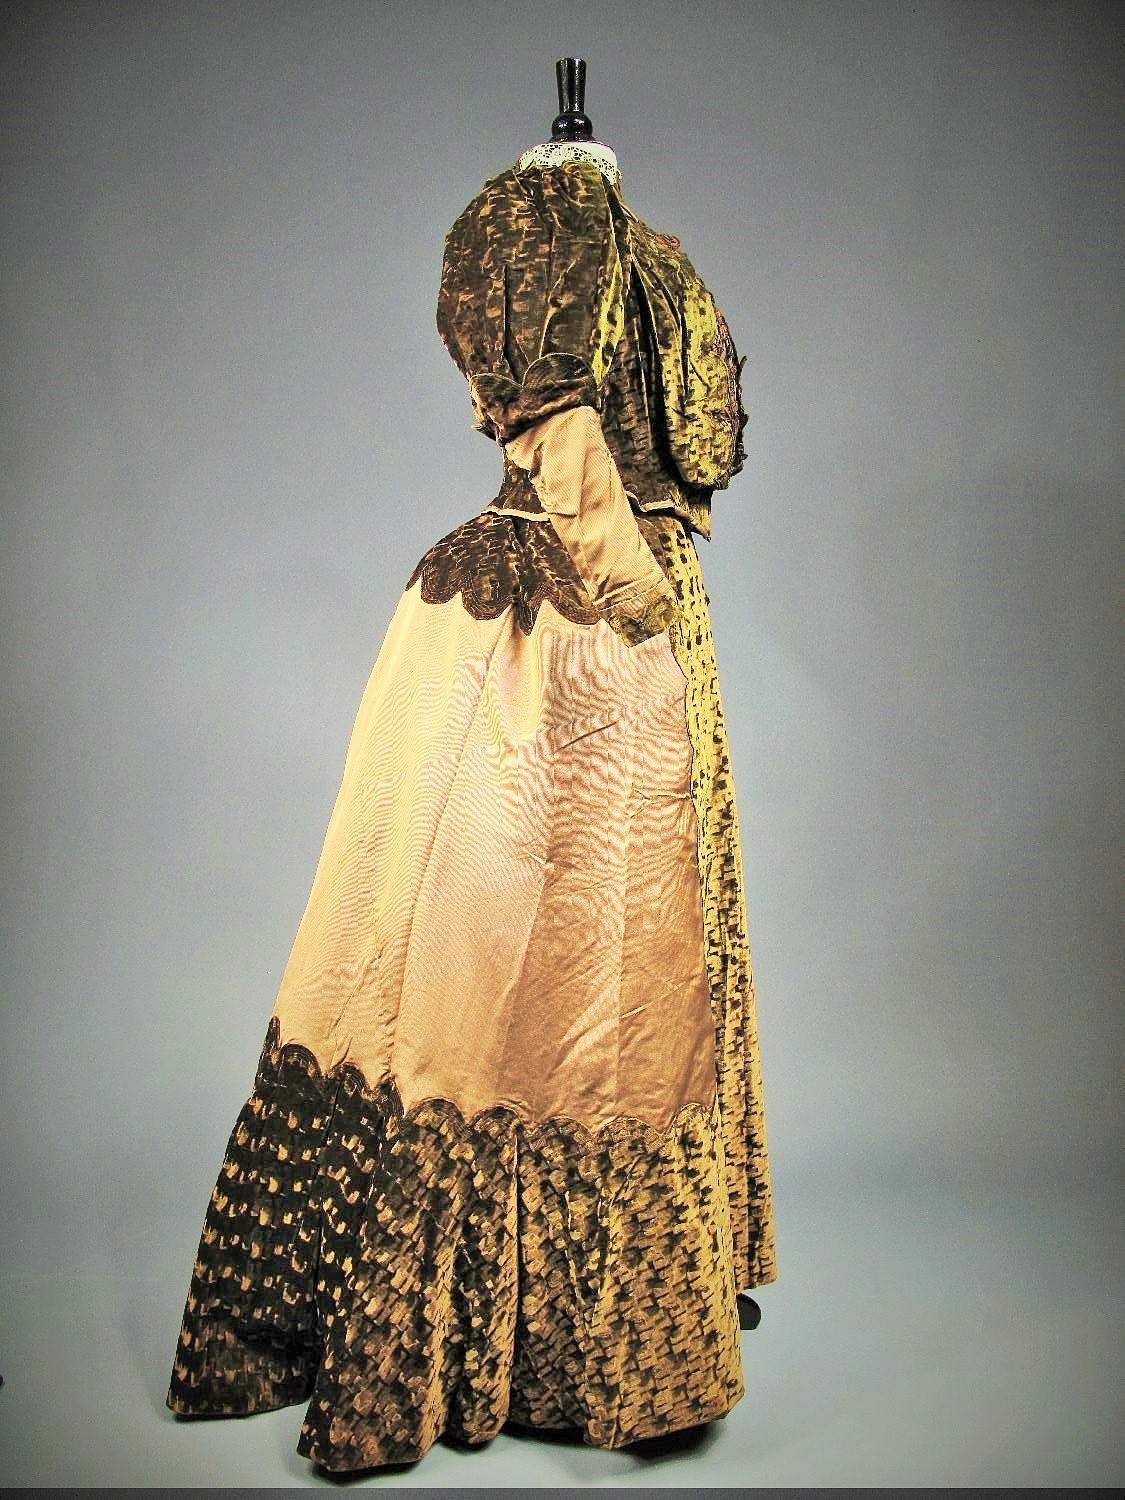 Circa 1900
France Paris

Two piece day or walking dress in green khaki waffled velvet on a chocolate silk ground. Boned bodice embellished with floral French « Art nouveau » embroidery in the "Style Nouille" made fashionable in Paris by